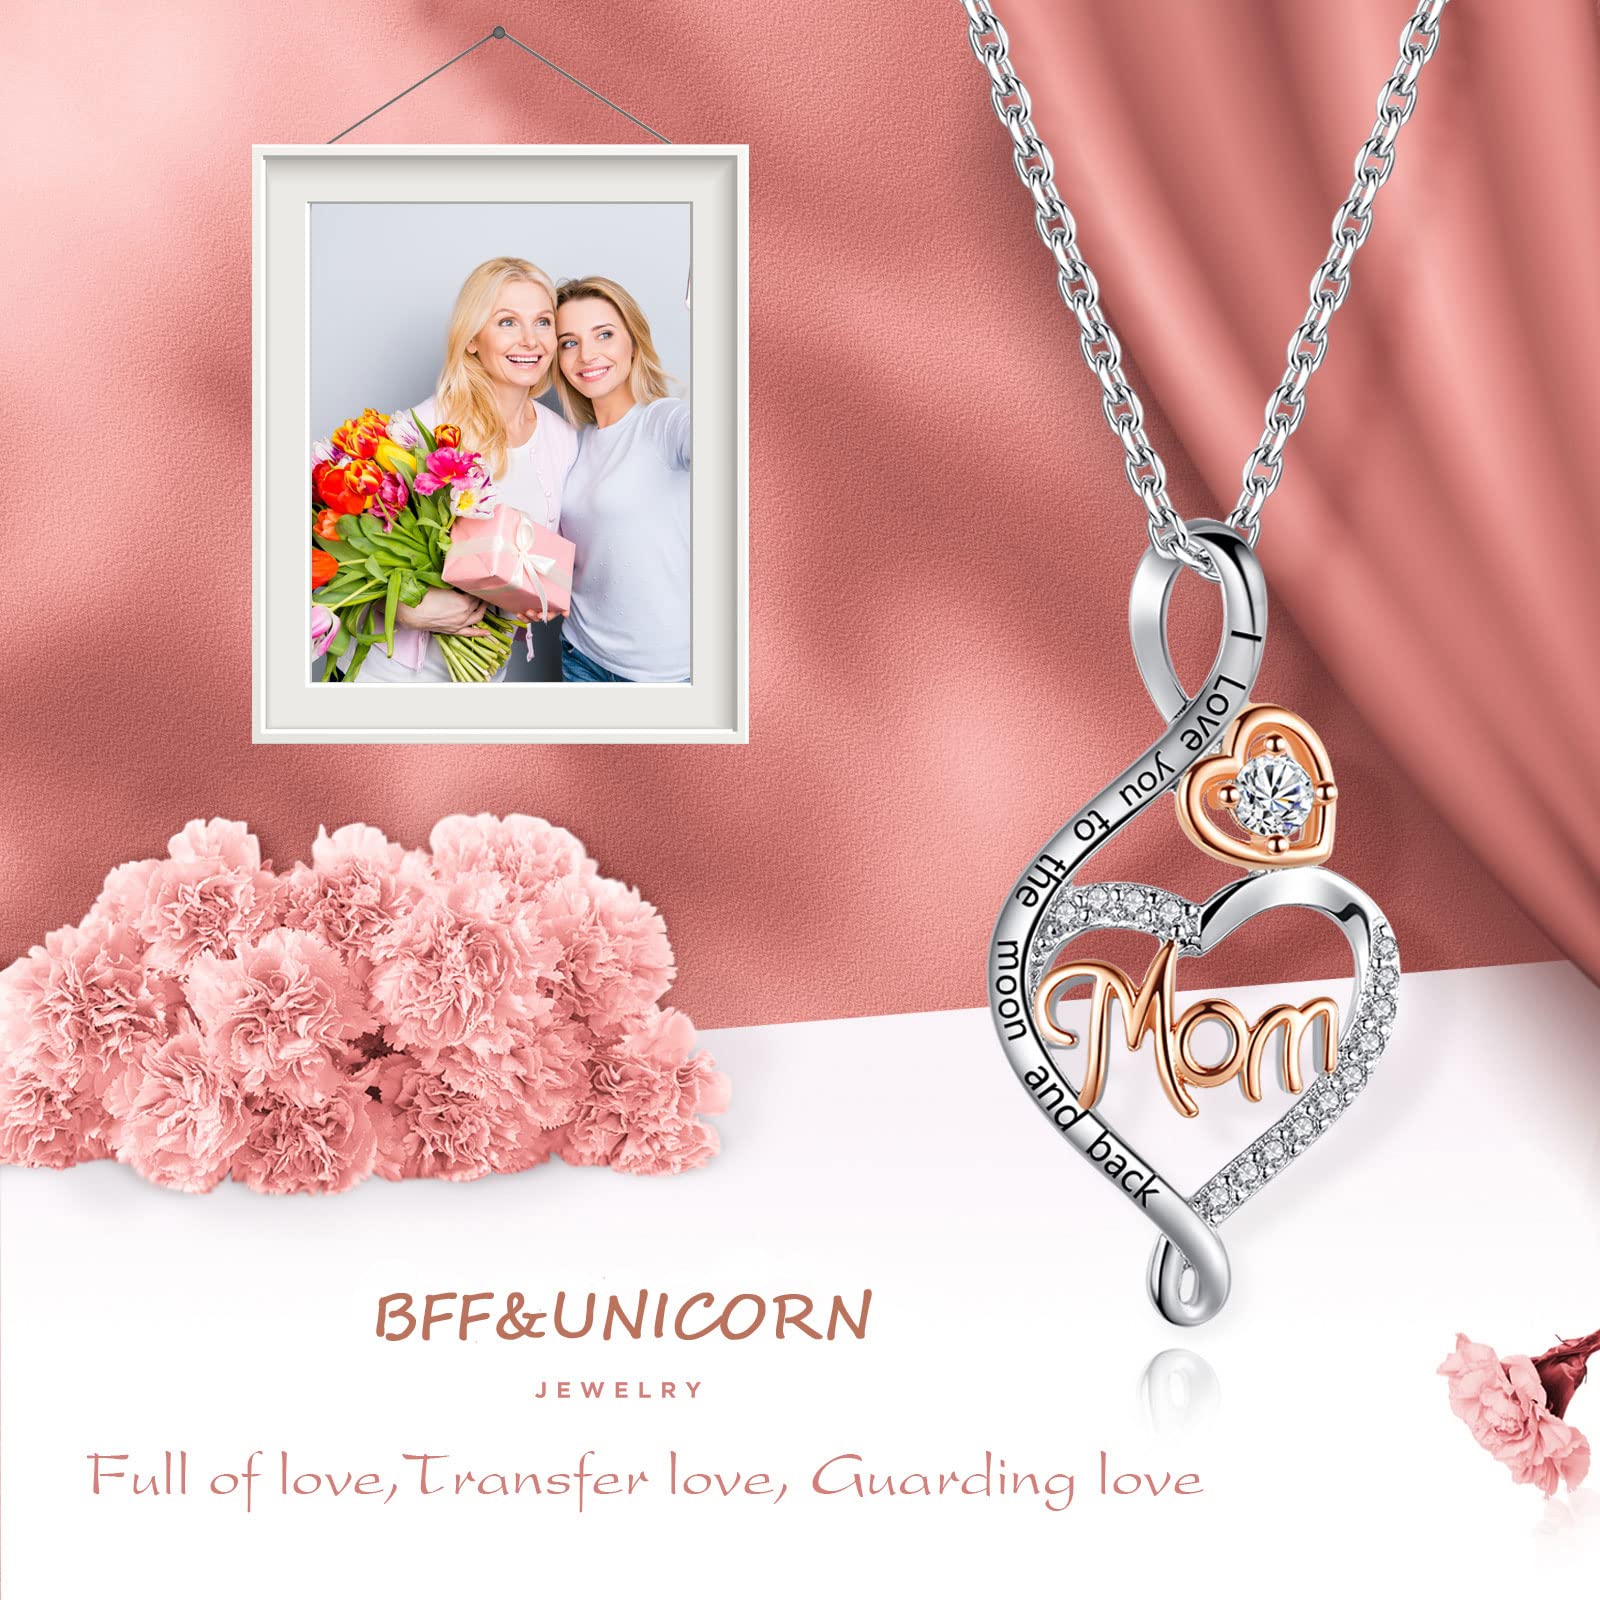 BFF&UNICORN Best Gifts for Women,Sterling Silver Mom Grandma Necklace, Birthday Mothers Day Jewelry Gifts for Mom Grandma Wife from Daughter Son